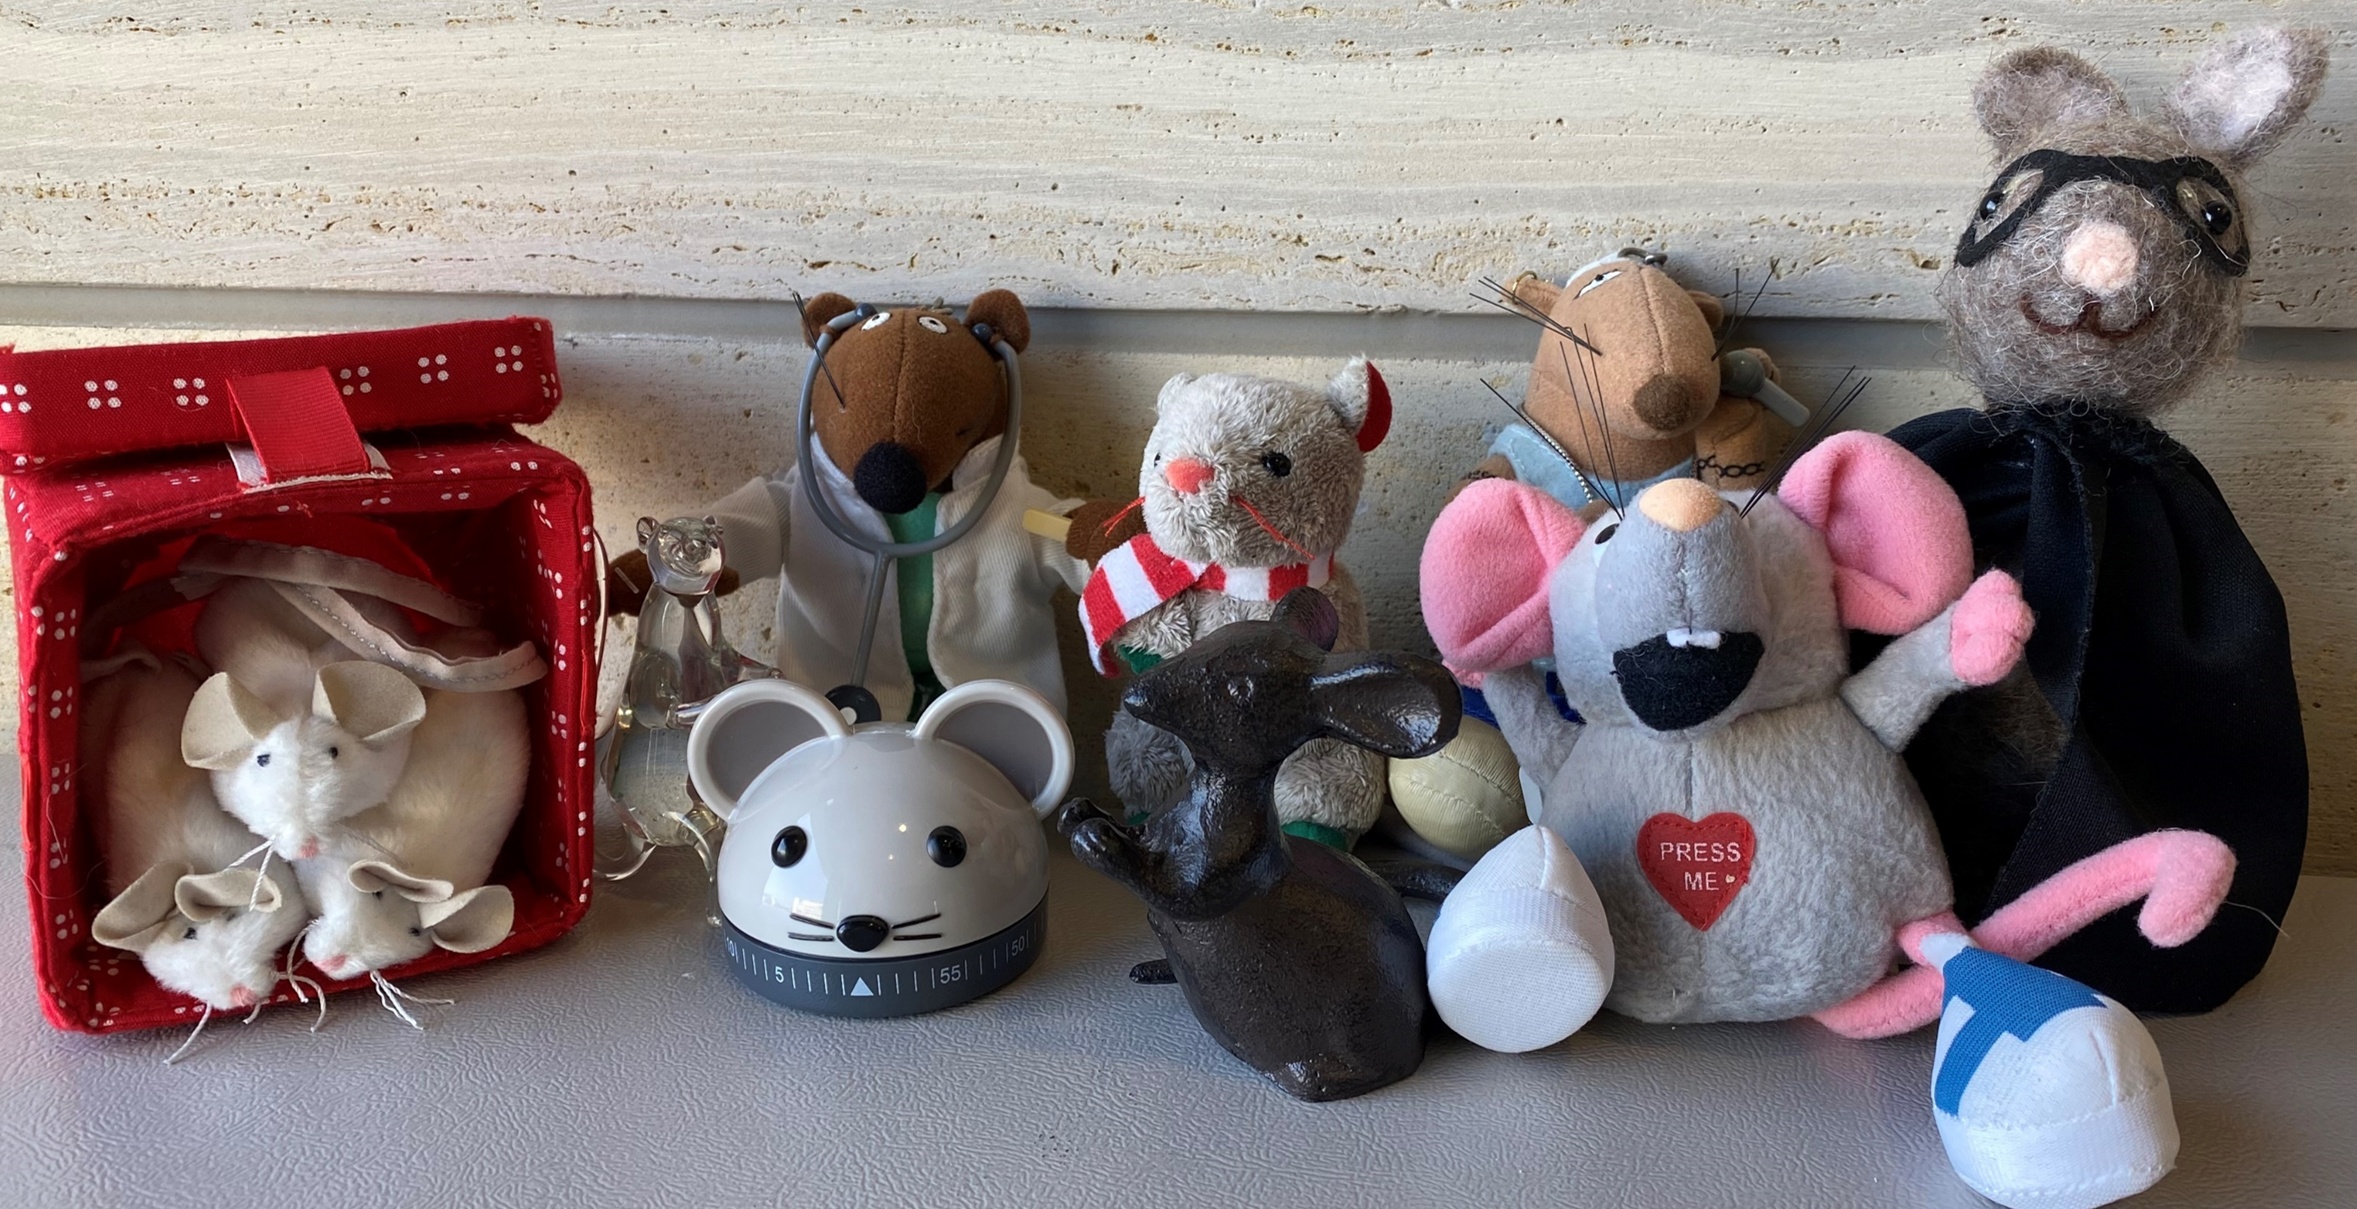 phot of mouse stuffed animals and toys 